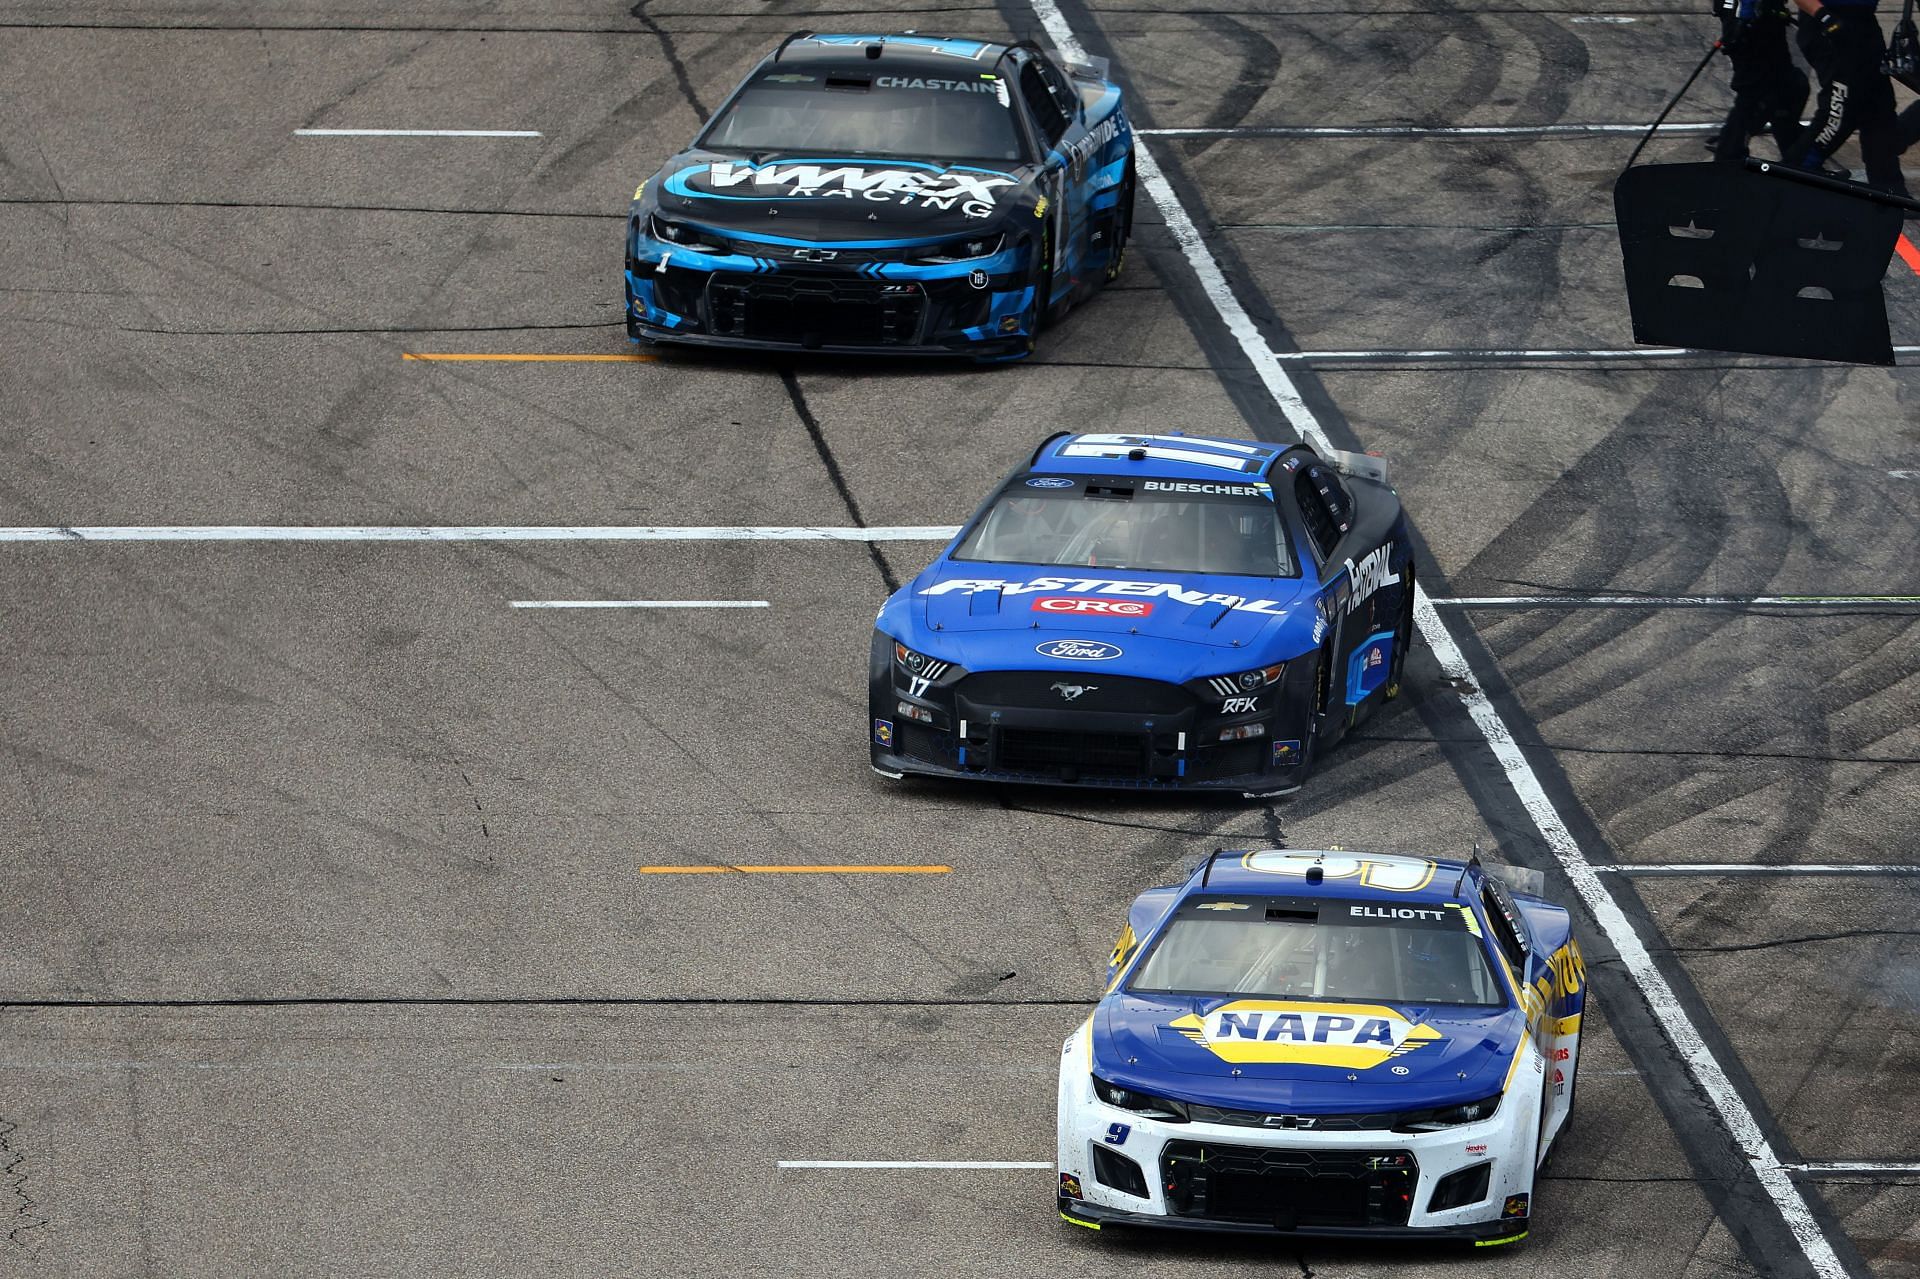 Cars exiting pit road during the 2022 NASCAR Cup Series Ambetter 301 at New Hampshire Motor Speedway in Loudon, New Hampshire (Photo by James Gilbert/Getty Images)